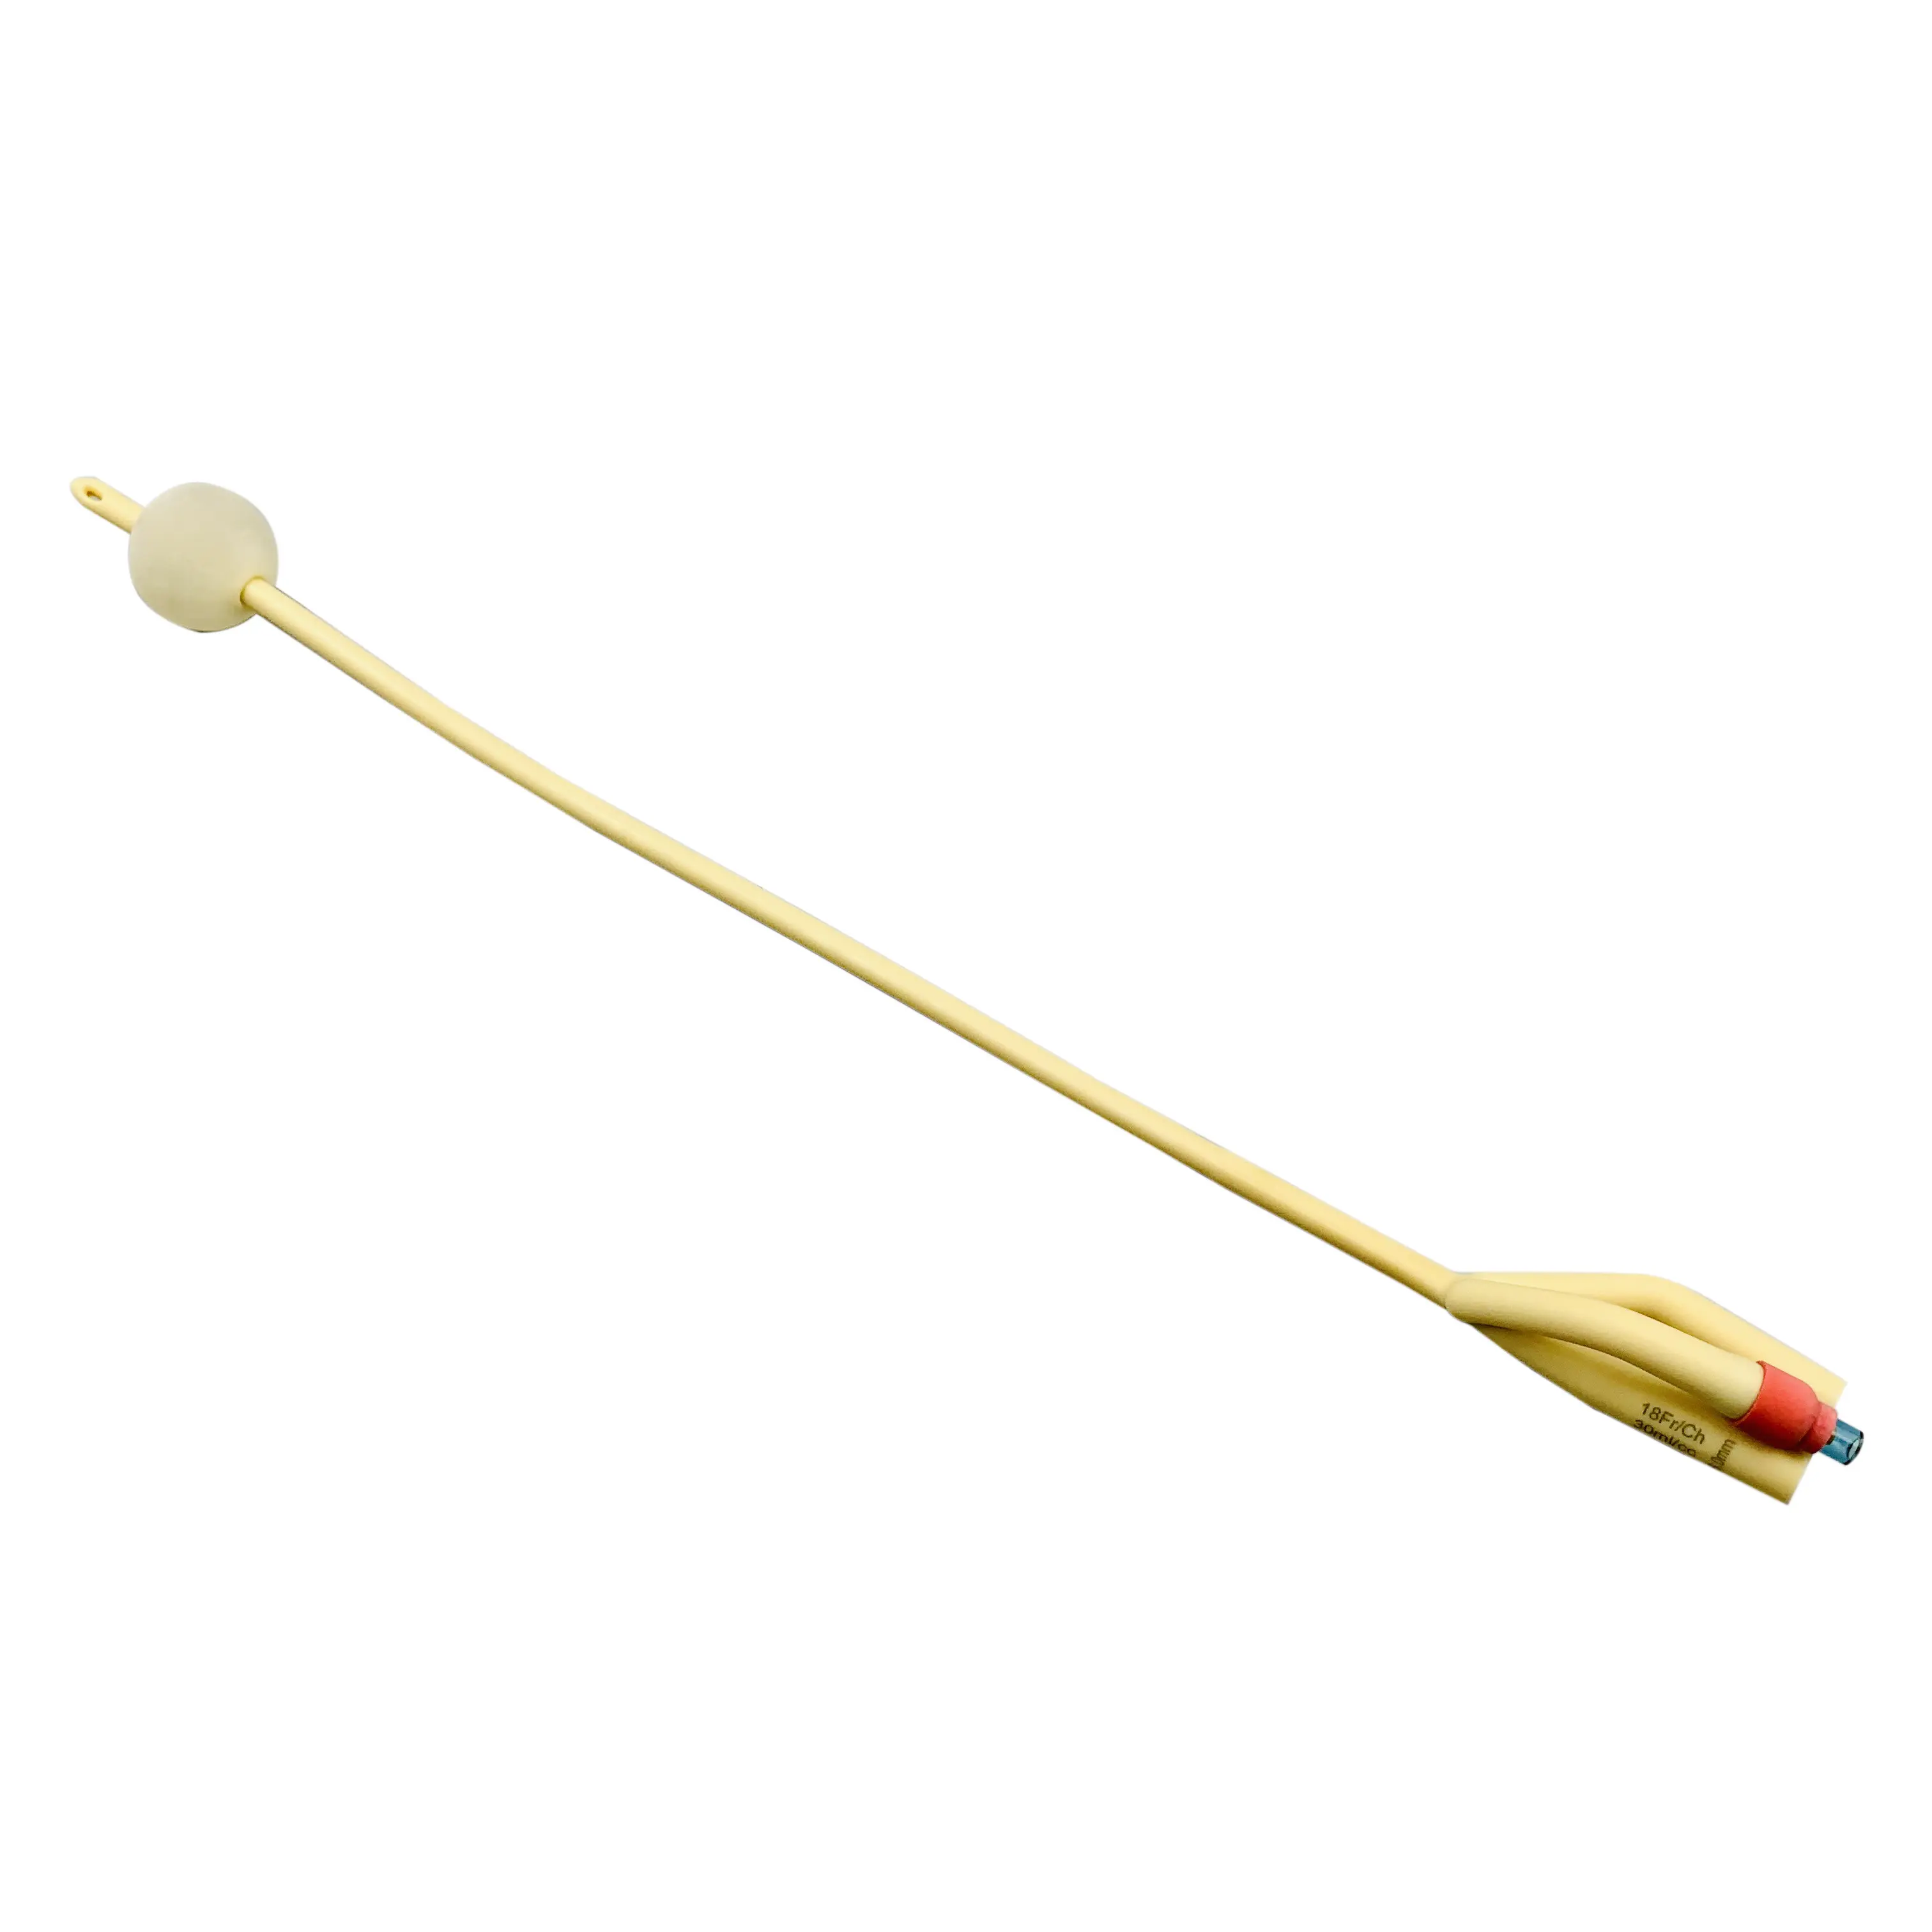 3 way Foley Catheter Latex silicone coated three way with rubber valve with PE inner bag packing